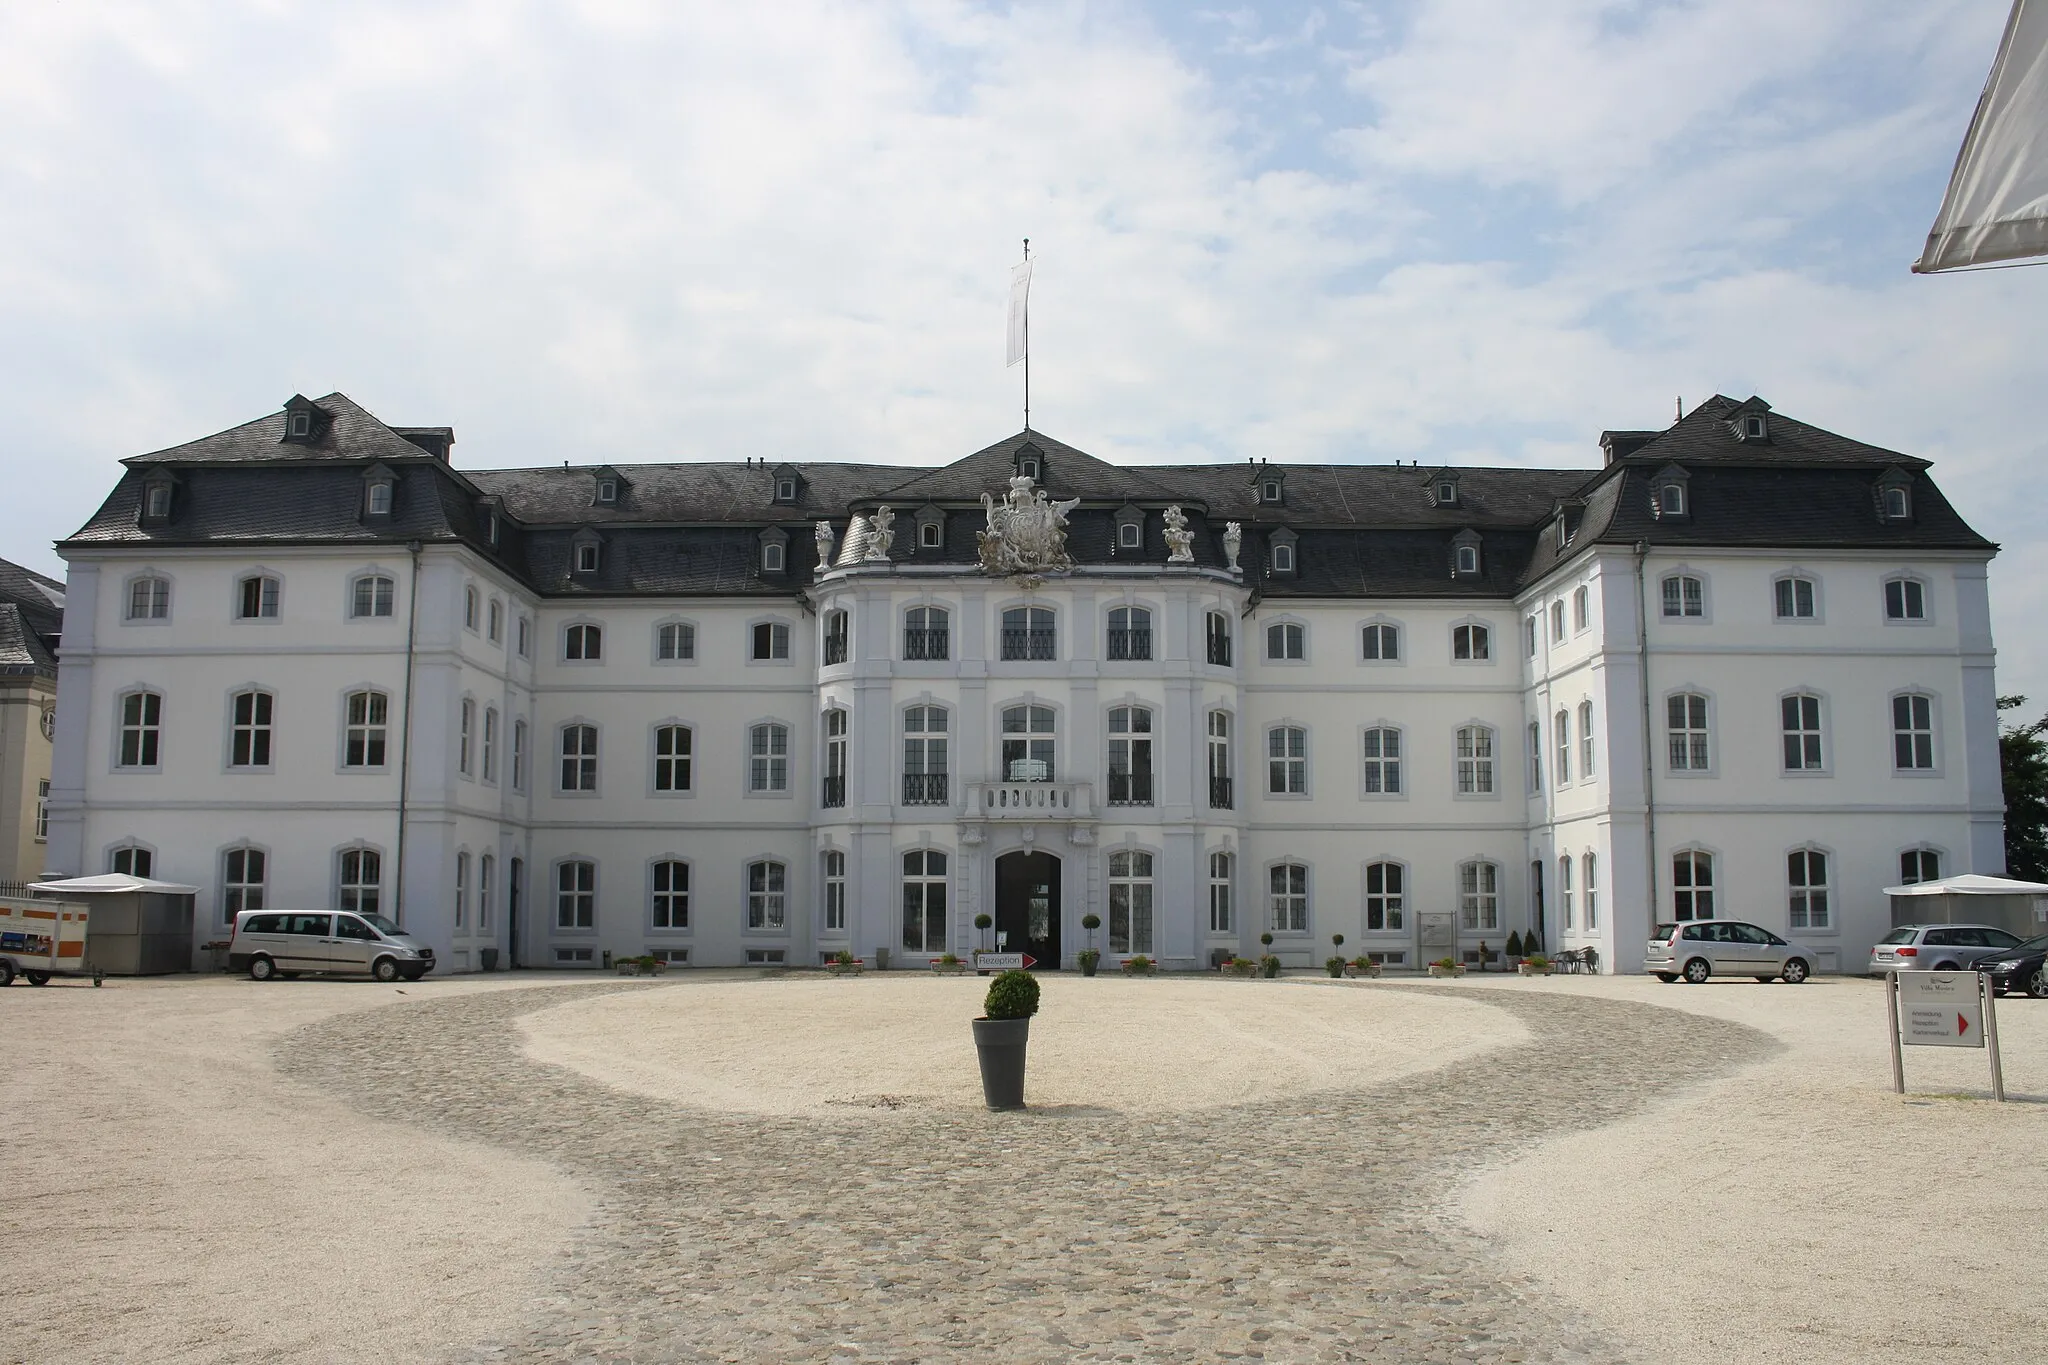 Photo showing: Neuwied-Engers, Germany. Castle of the former prince-electors of Trier, view from North.